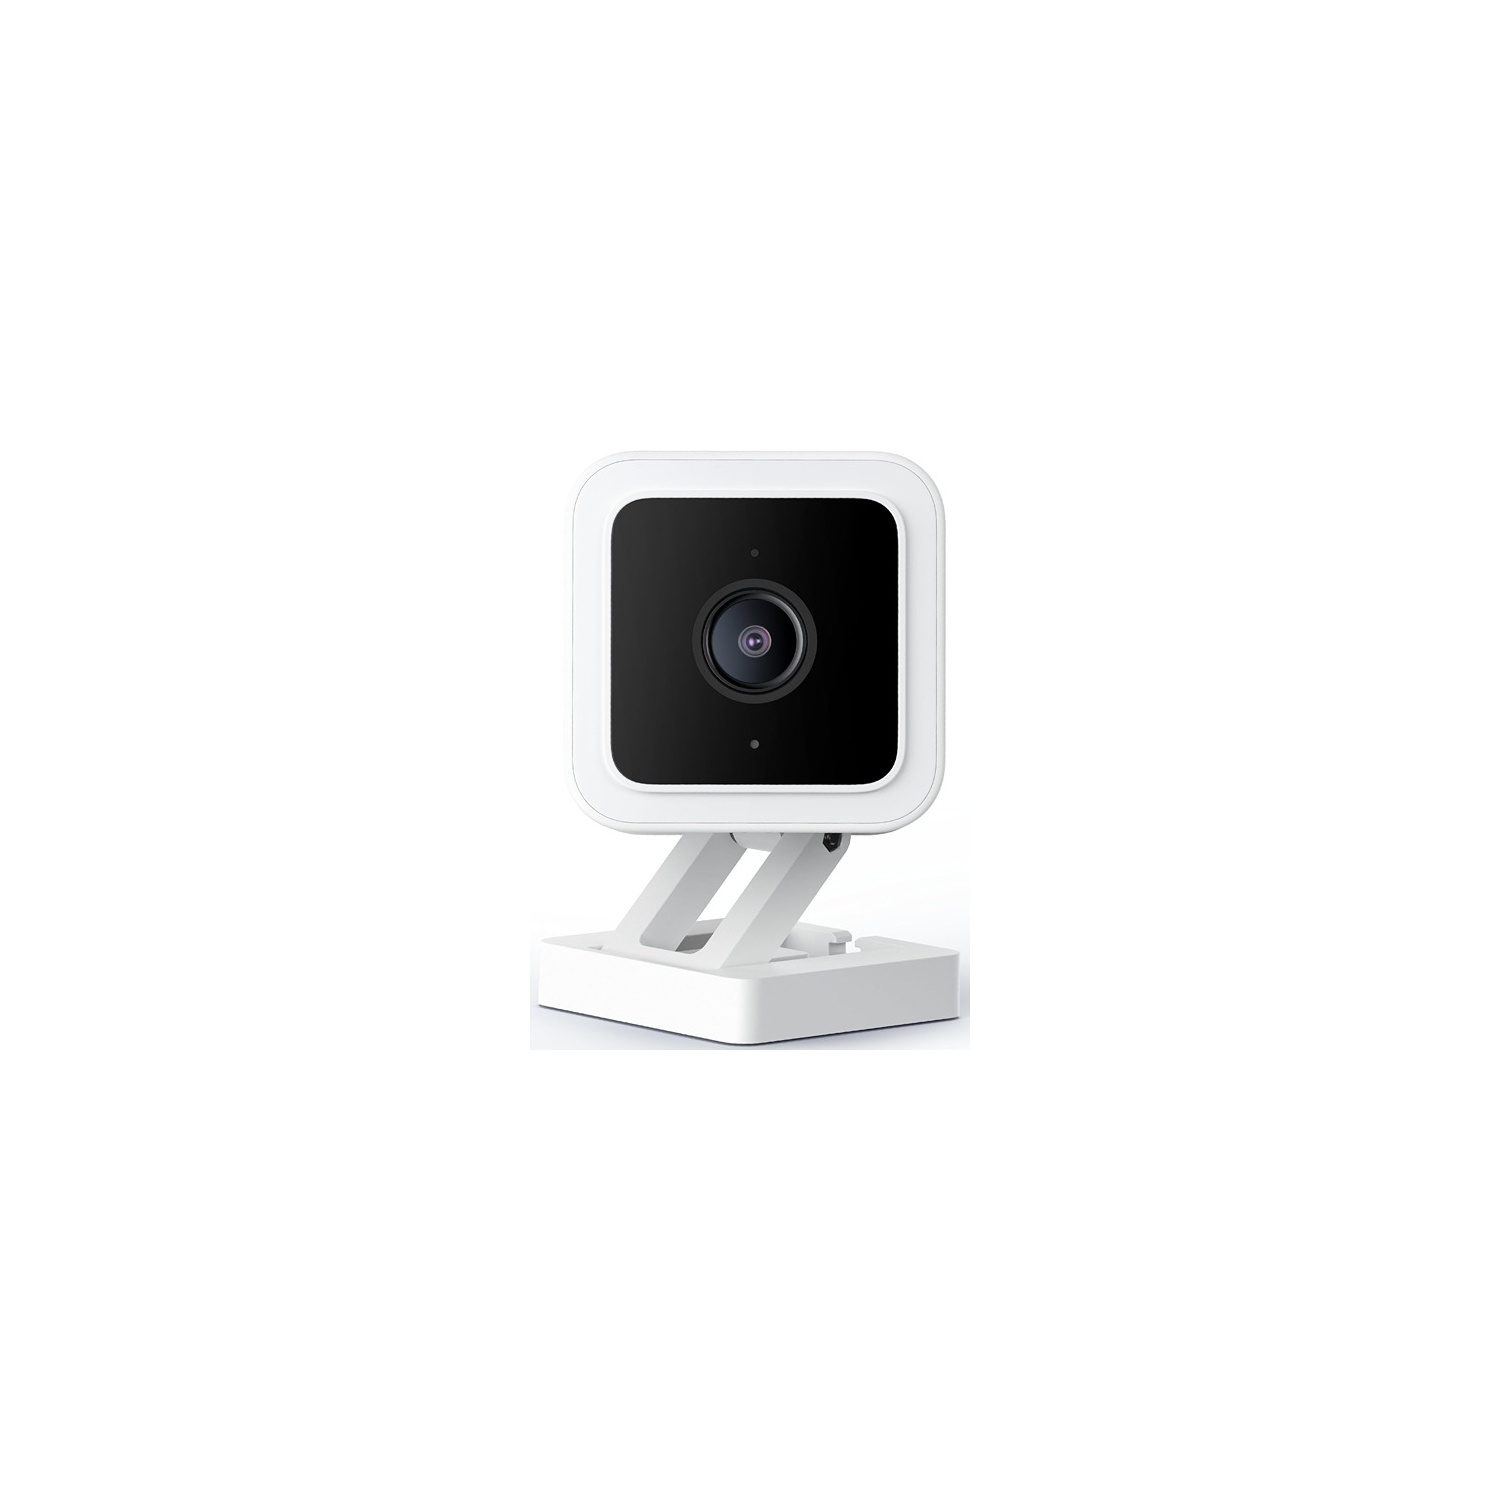 WYZE 6.38 x 5.69 x 9.98 cm Cam v3 a Wired 1080p HD Indoor Outdoor Video Camera with Color Night Vision White